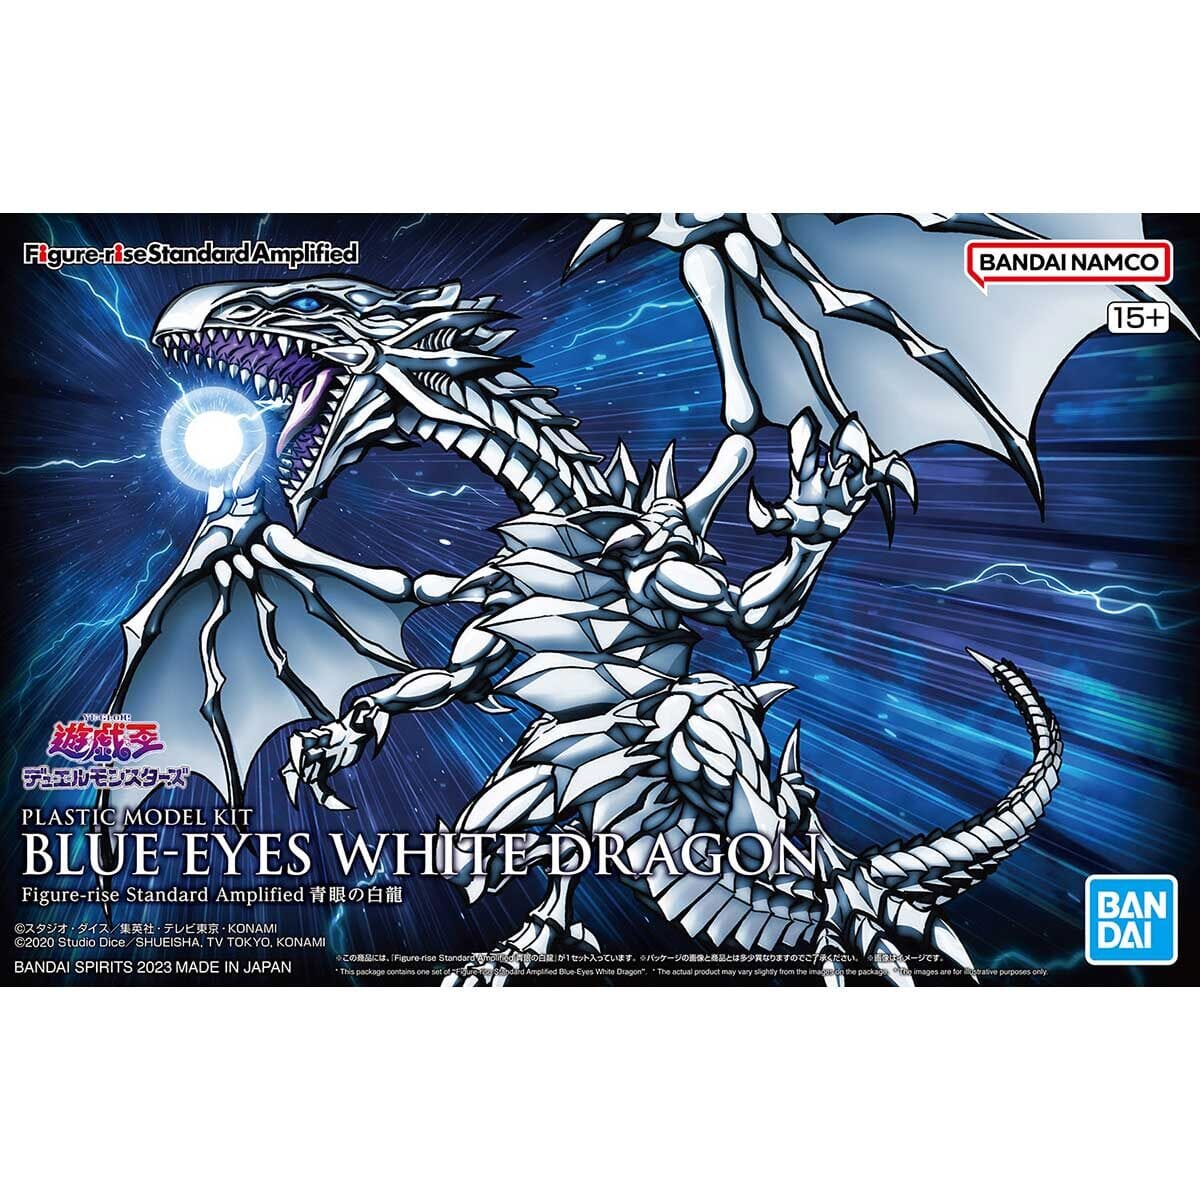 Figure-rise Standard Amplified Black Luster Soldier (Yu-Gi-Oh